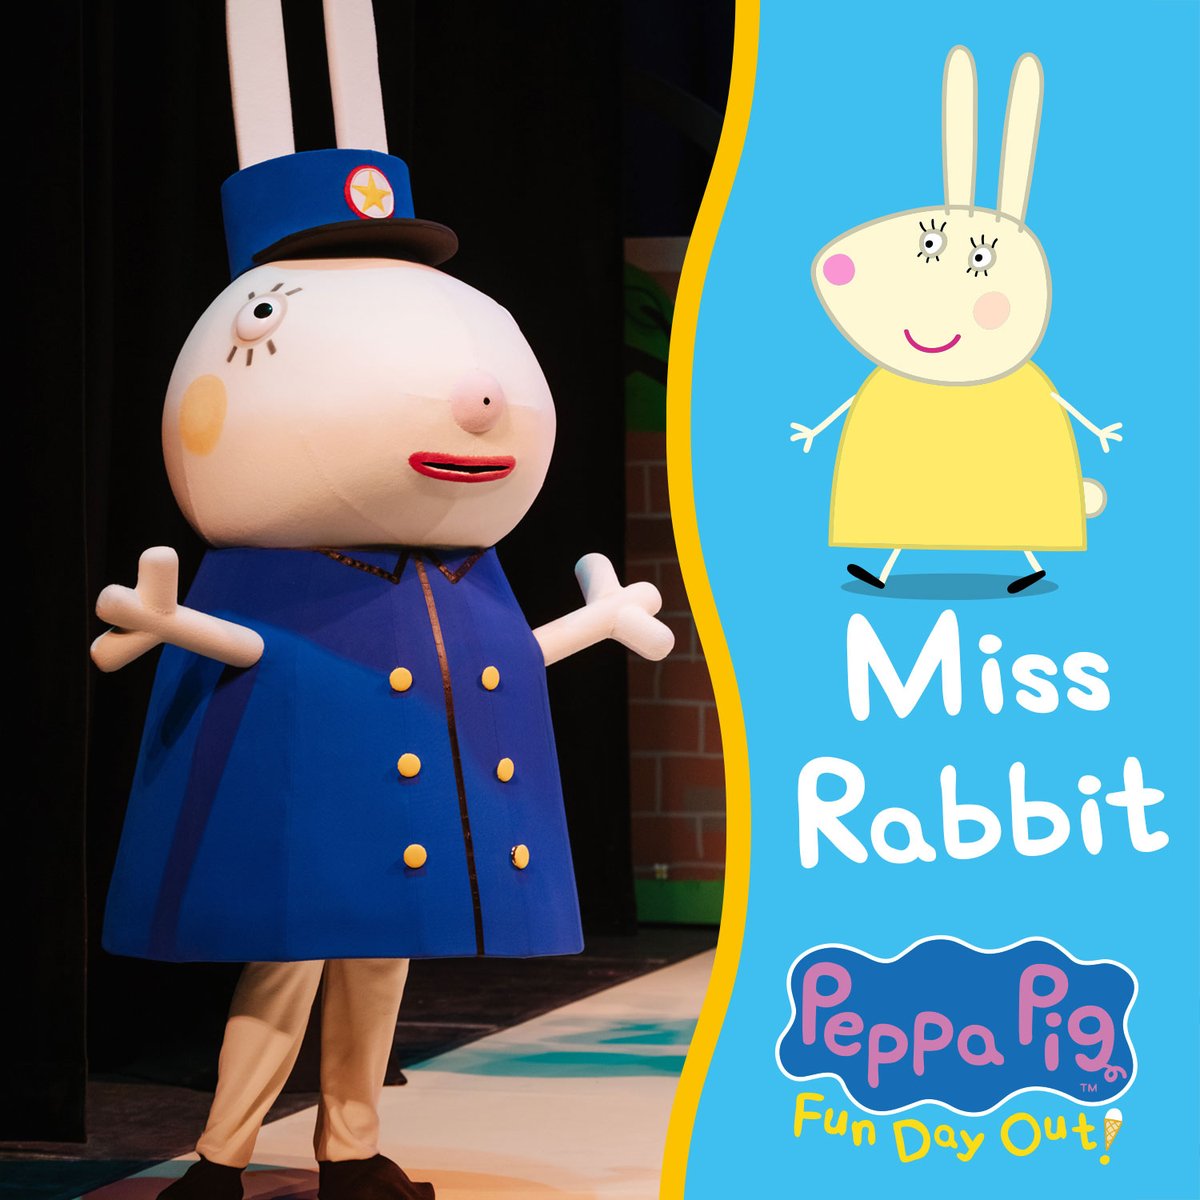 Despite having soooo many jobs, Miss Rabbit has found time to join us on our tour of Peppa Pig Fun Day Out! Catch her in action across the country - find out tour dates at peppapiglive.com 🐰 ✨ #PeppaPigLive